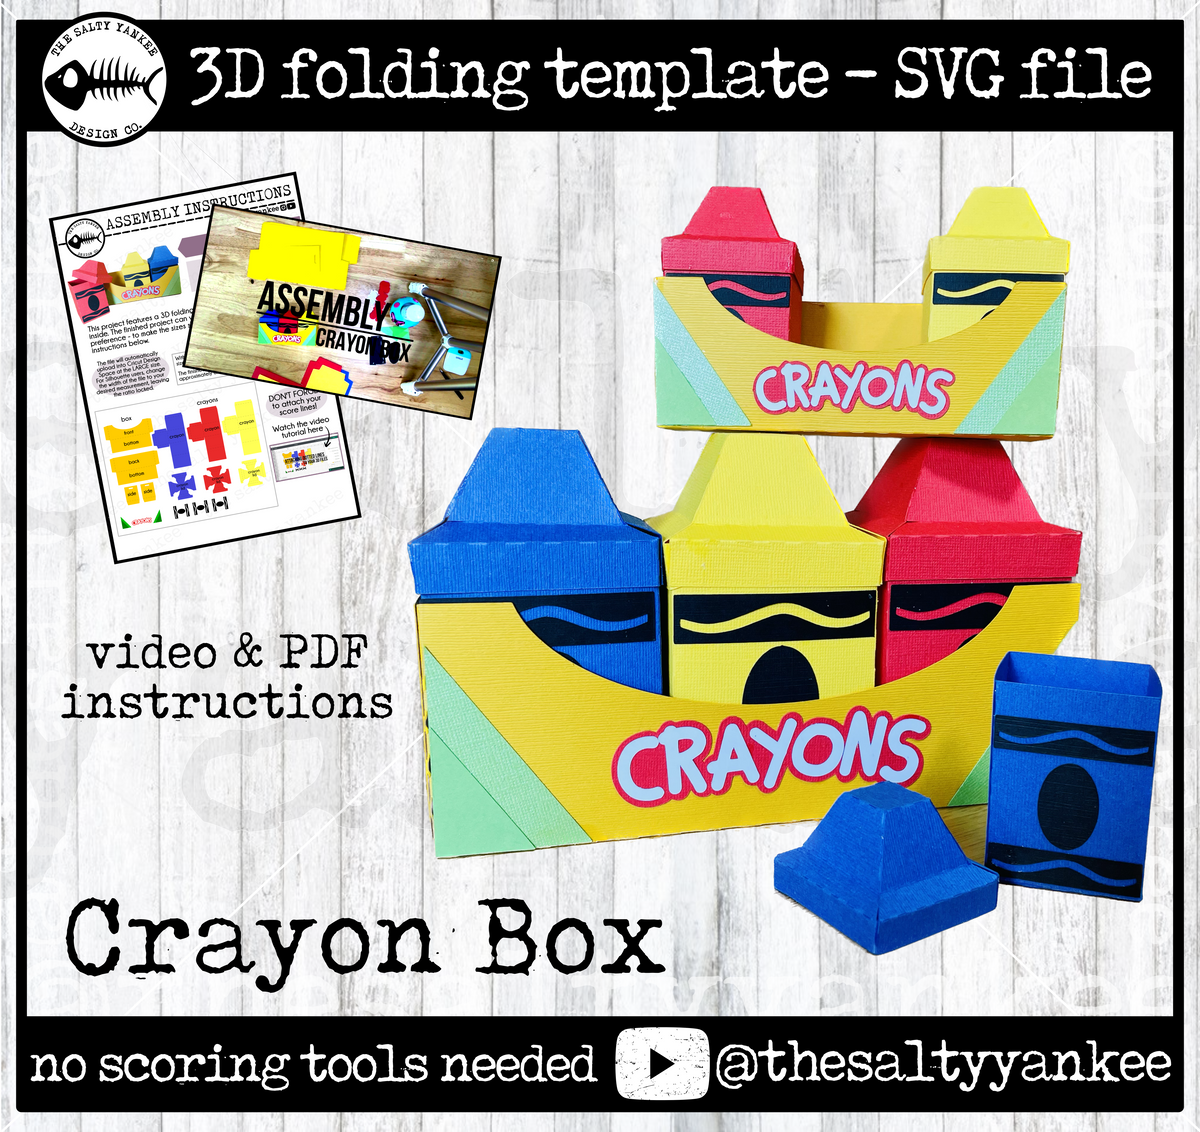 Crayon Box 3D Folding Project Graphic by thesaltyyankee · Creative Fabrica